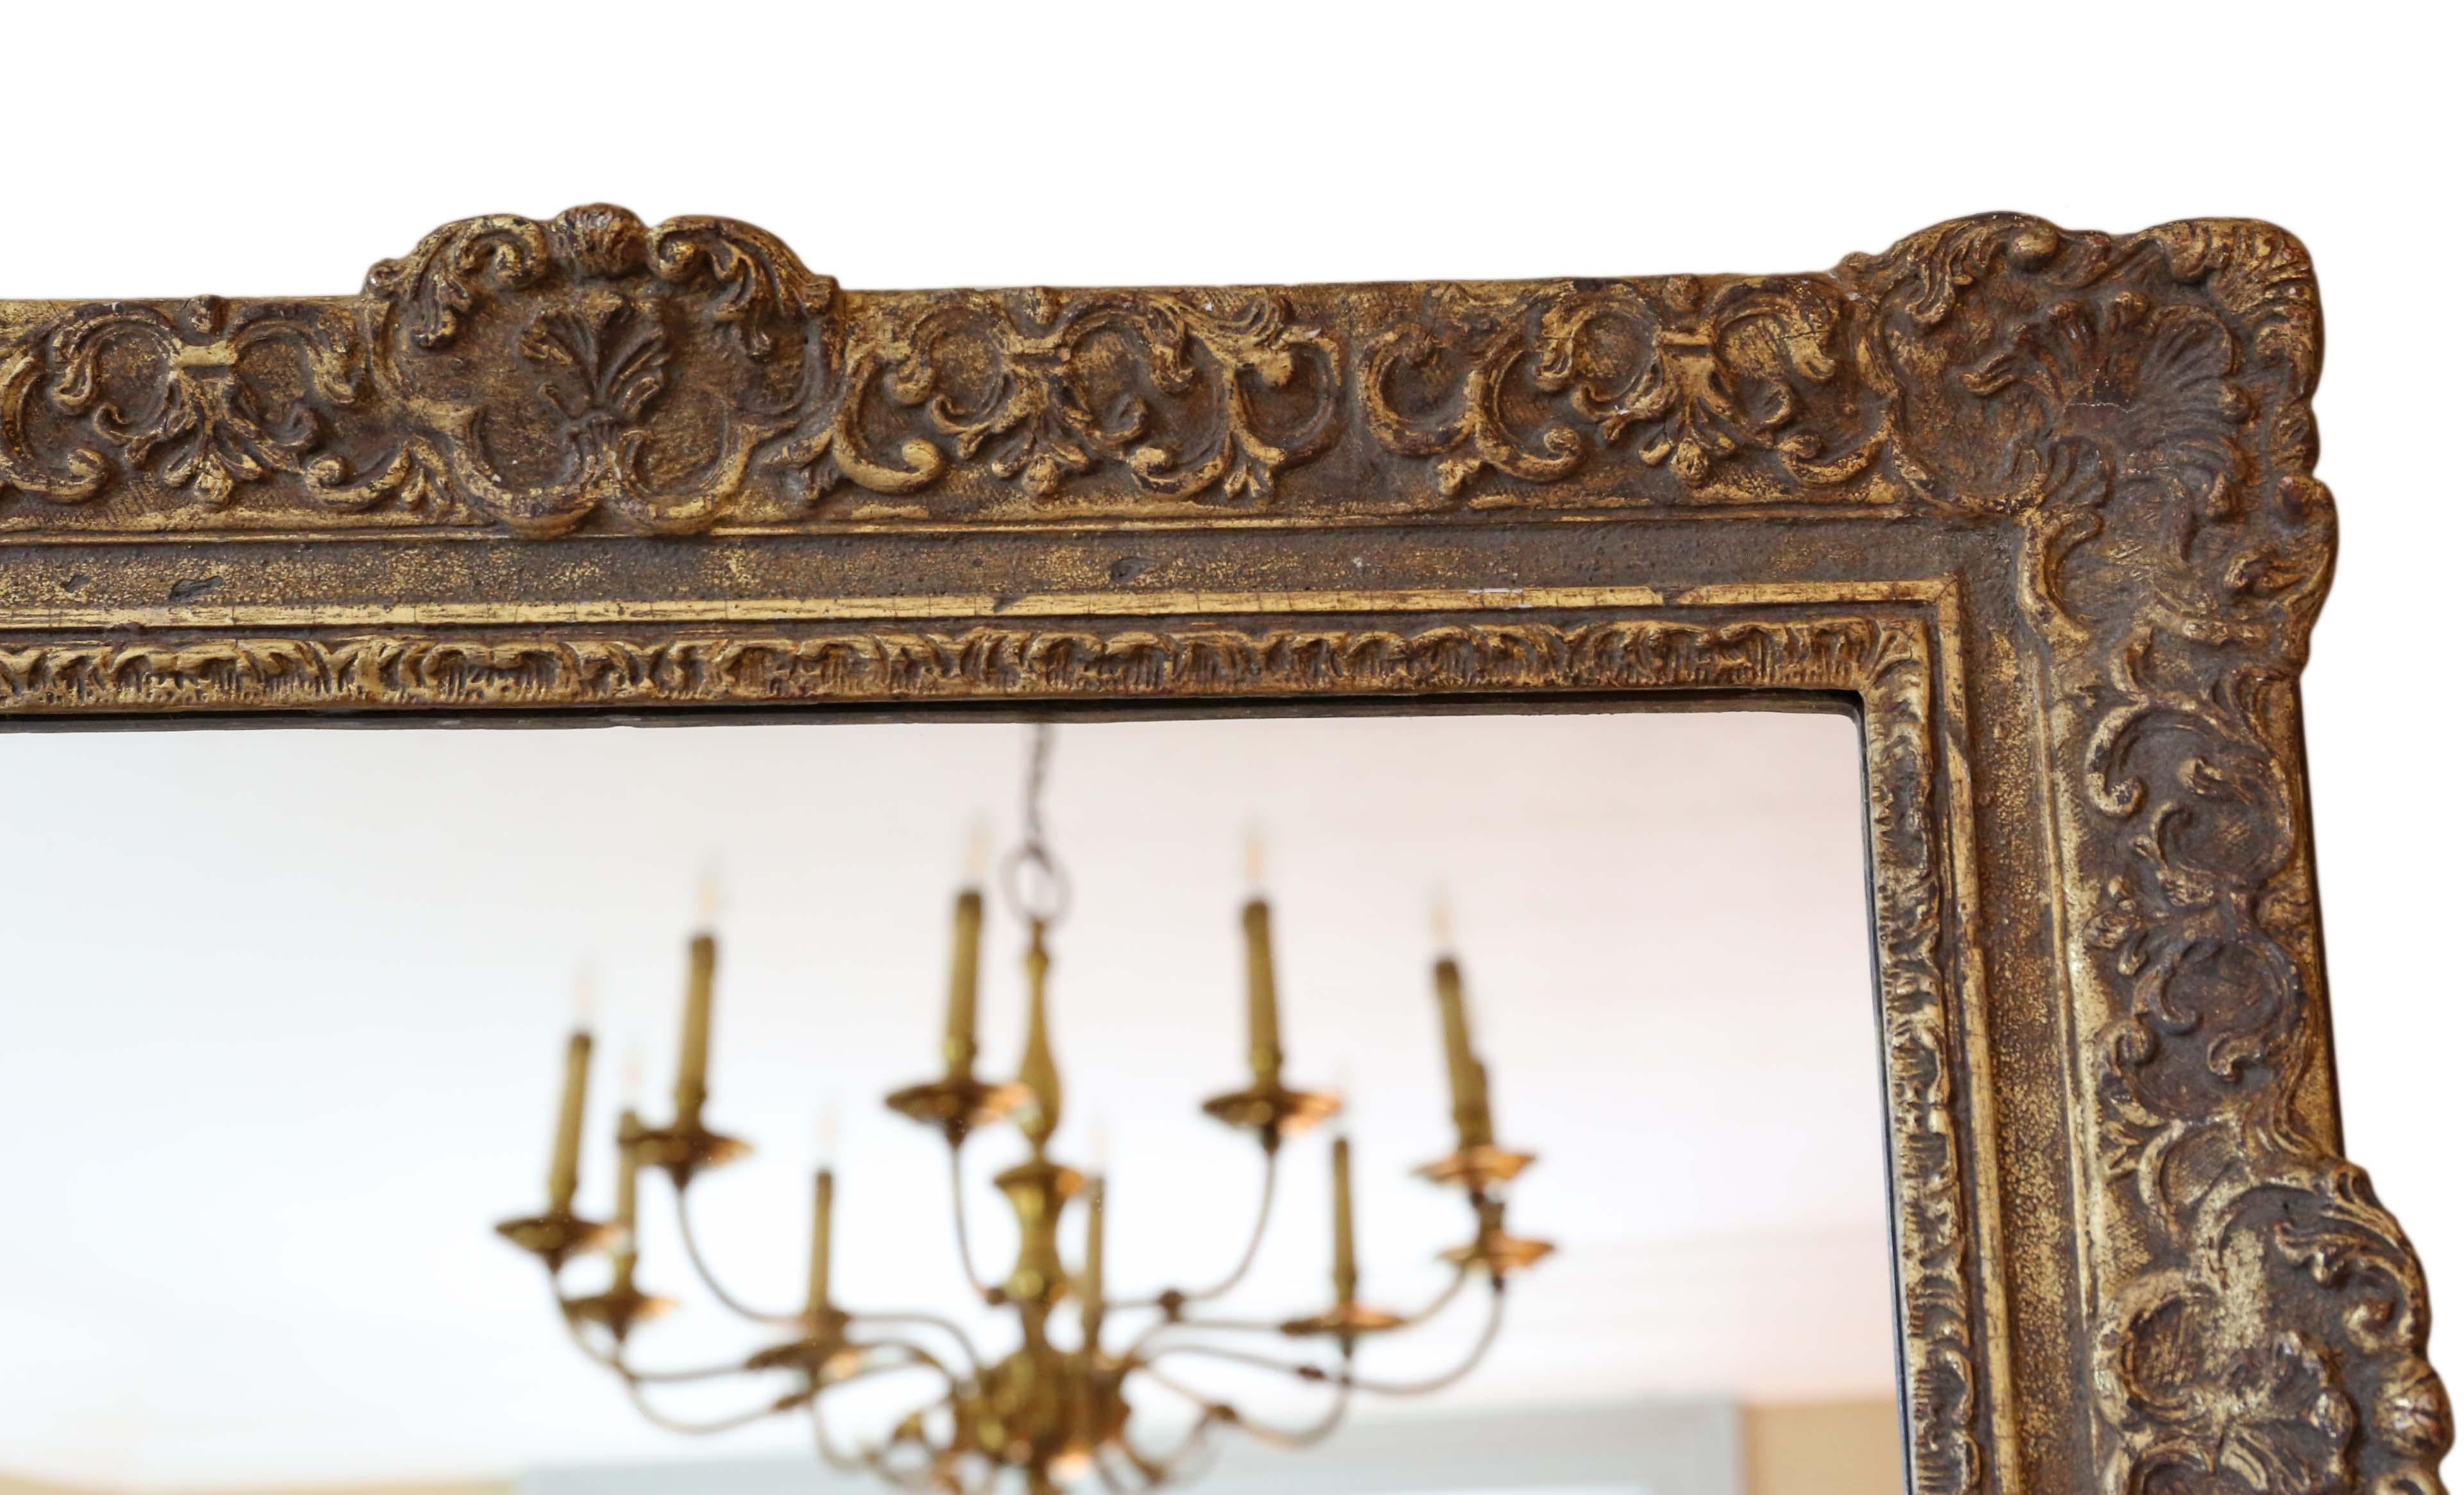 Antique Gilt Wall Mirror 19th Century Overmantle In Good Condition For Sale In Wisbech, Cambridgeshire